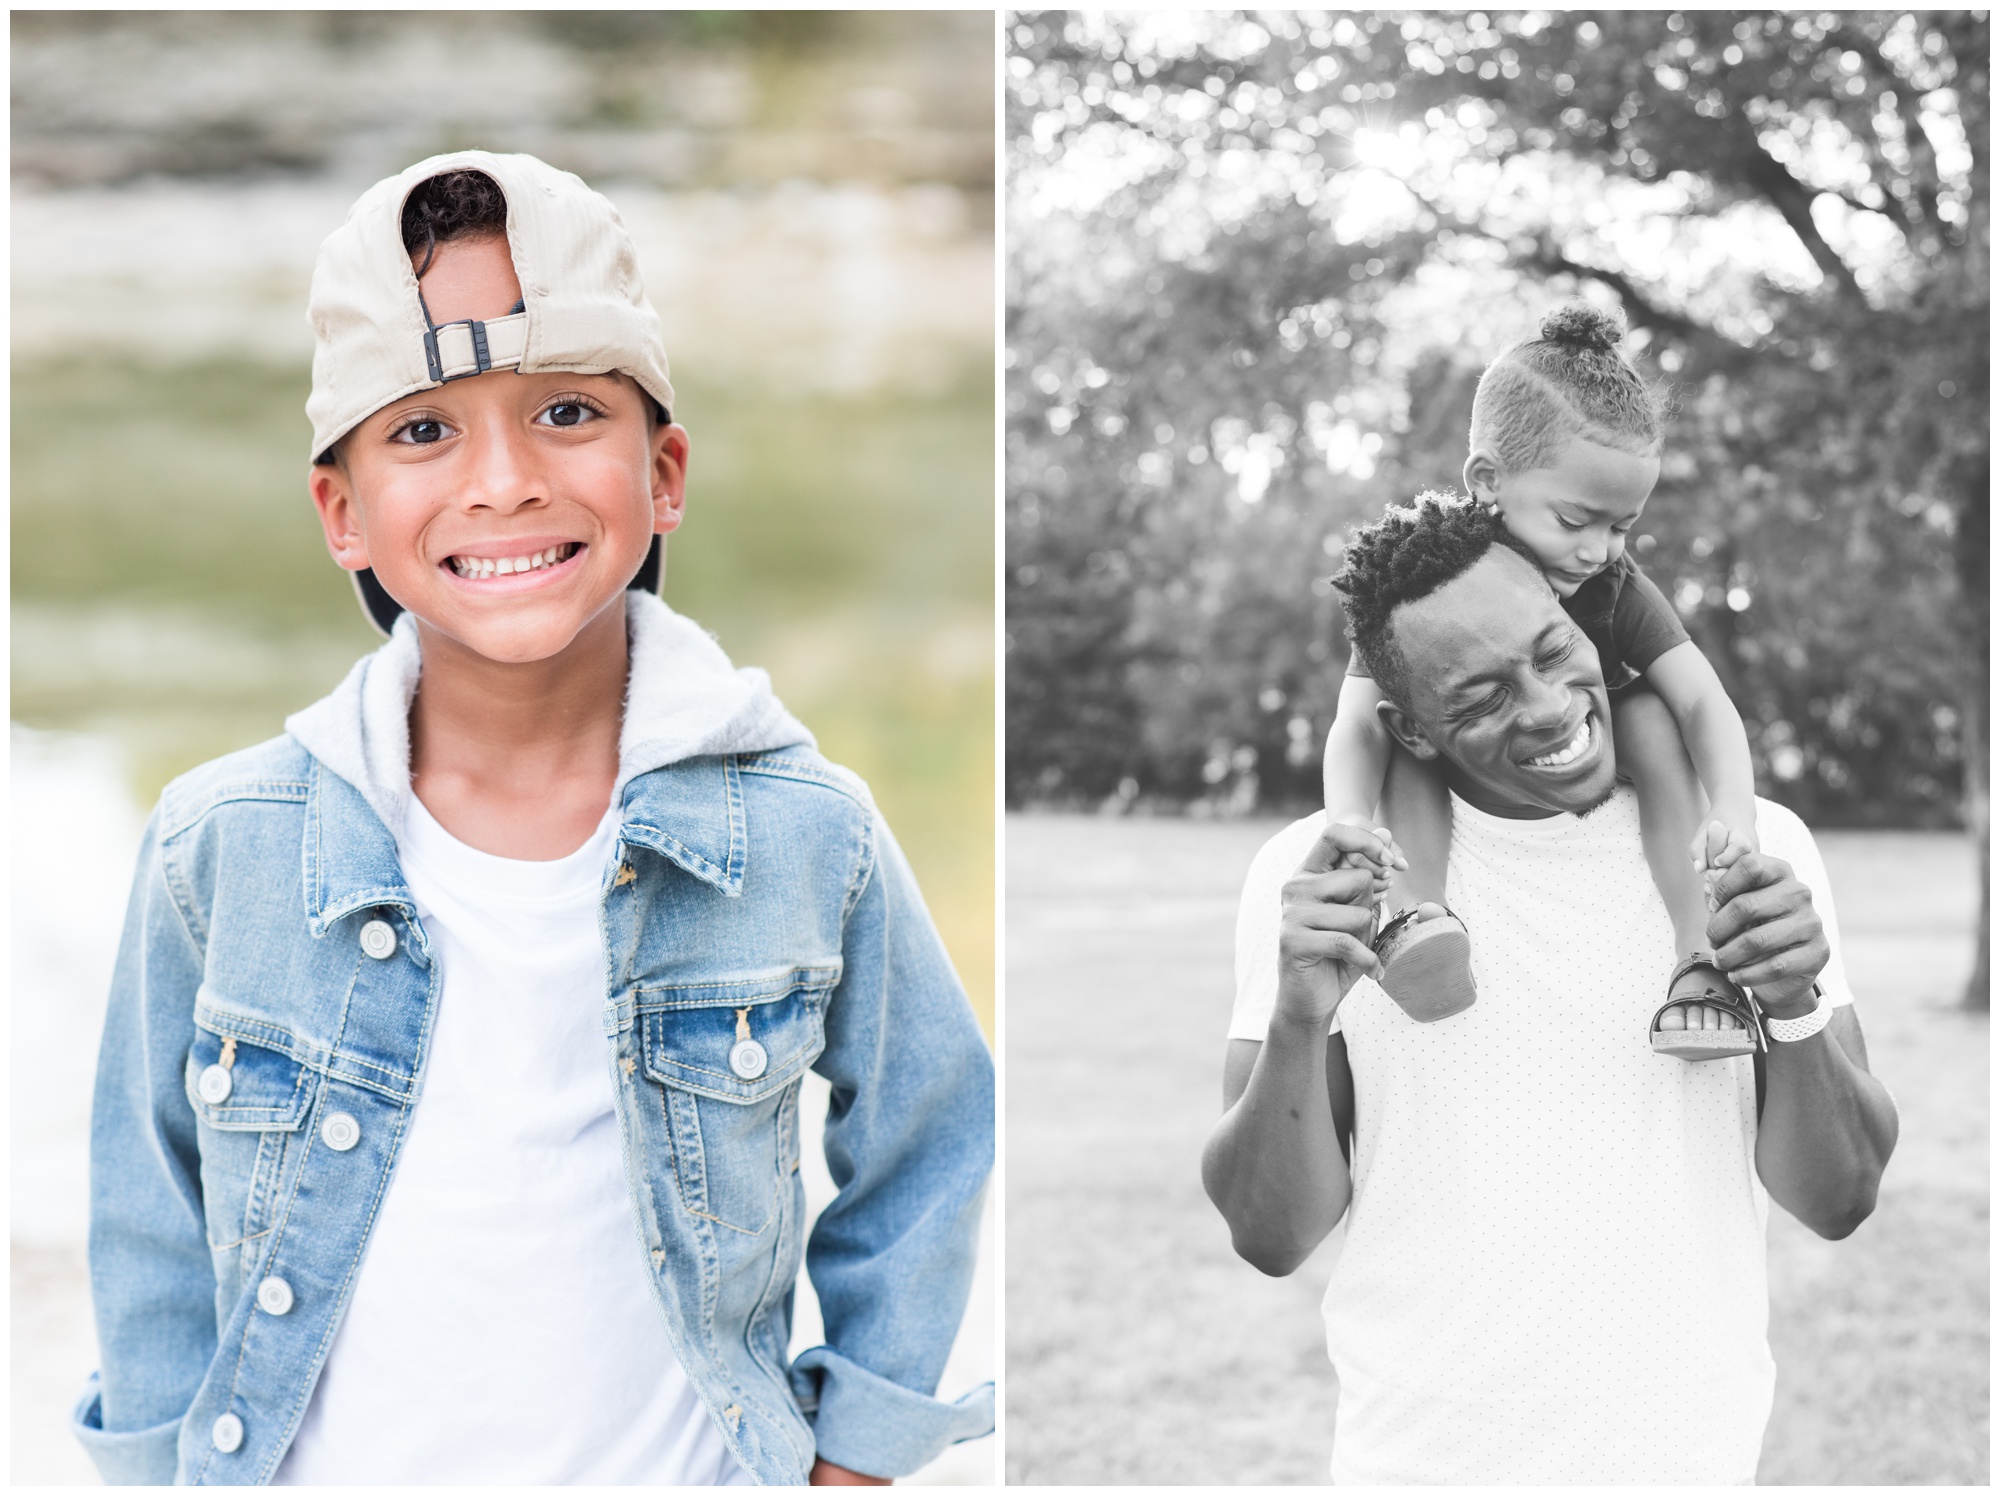 Fort Worth Family Photographer | Fort Worth Family Session | Airfield Falls Fort Worth | Fort Worth Photographer | Lauren Grimes Photography